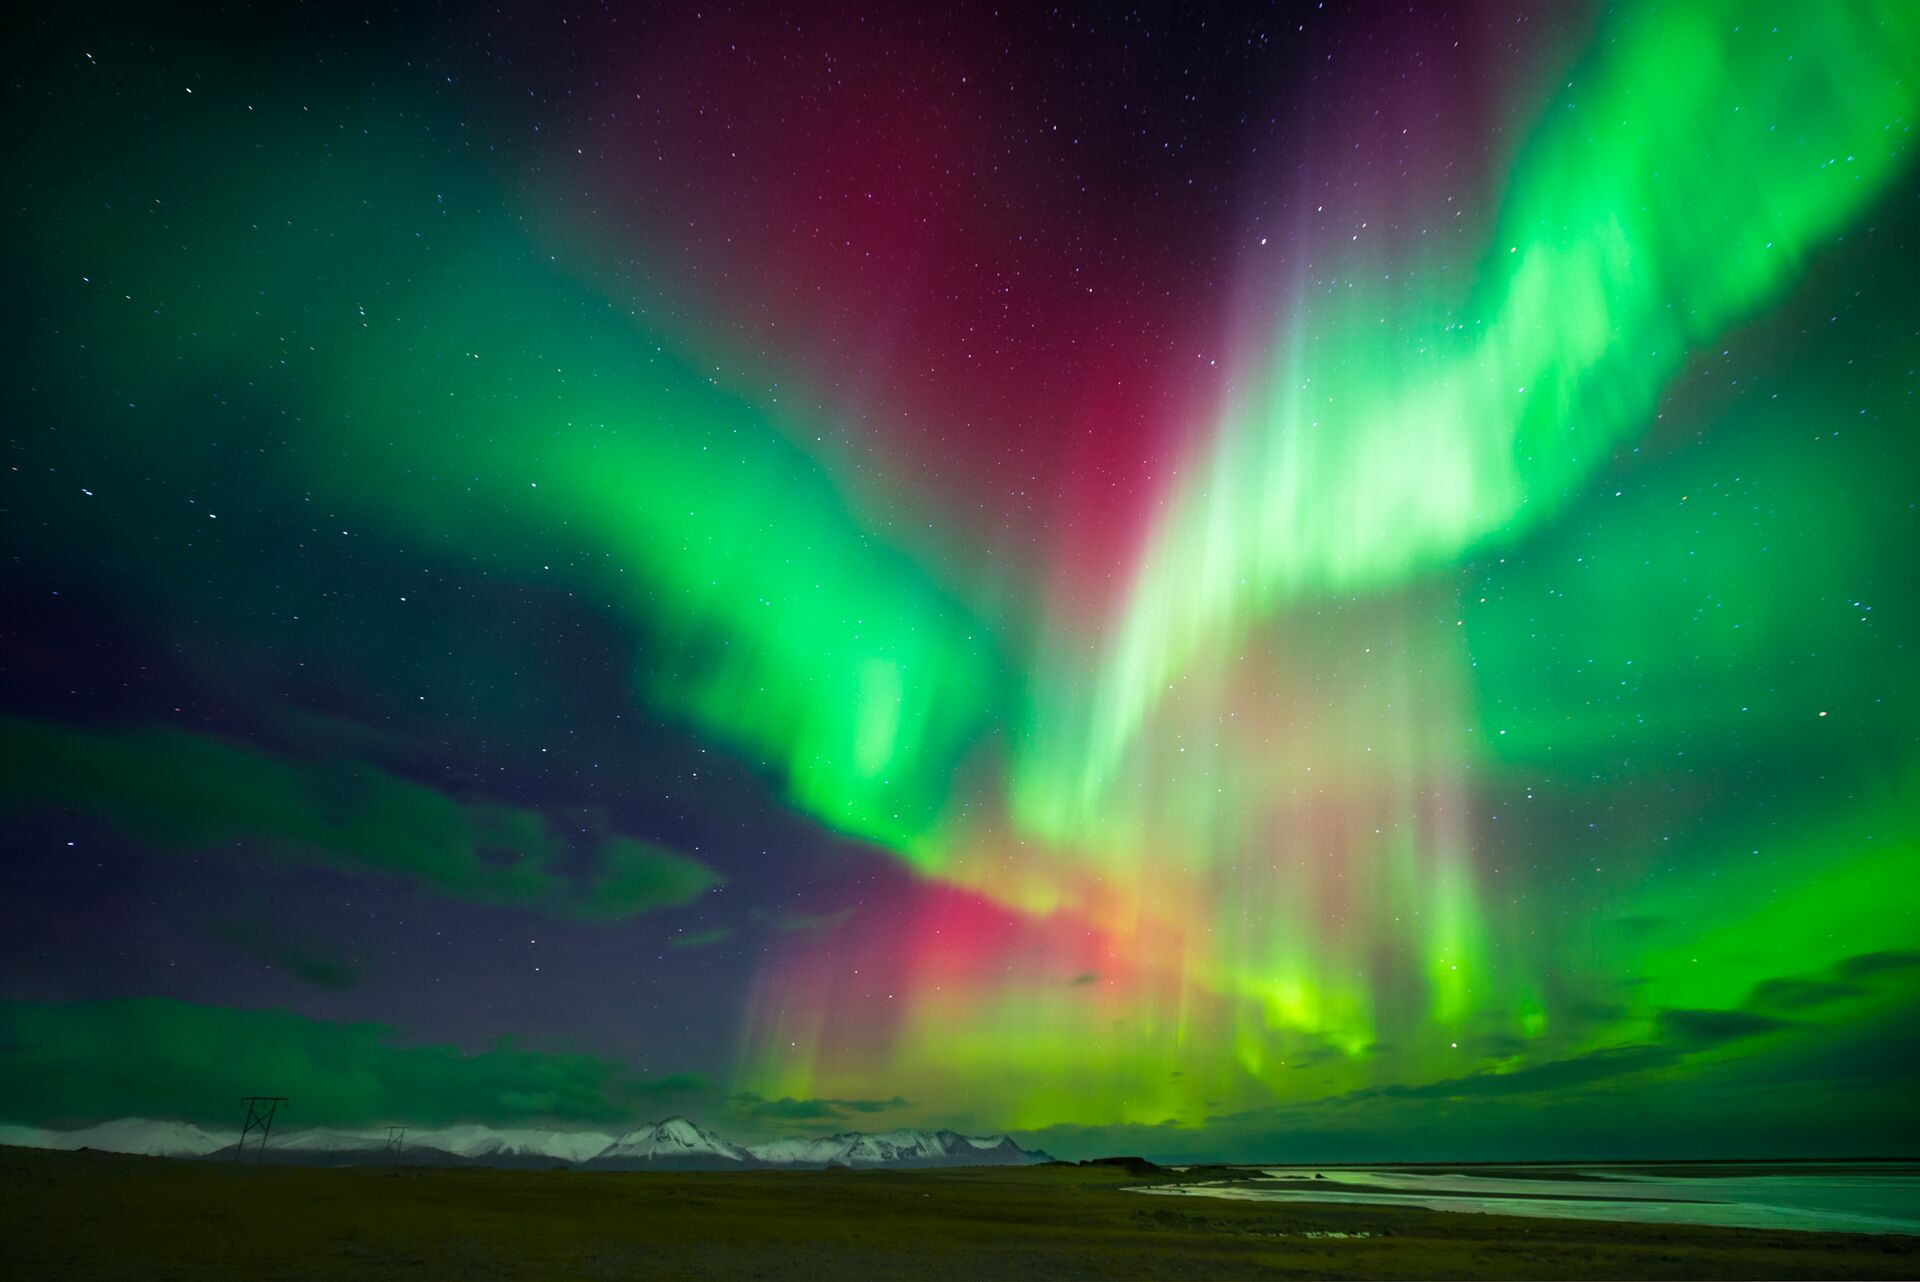 bright red and green northern lights criss cross the night sky in Scandinavia